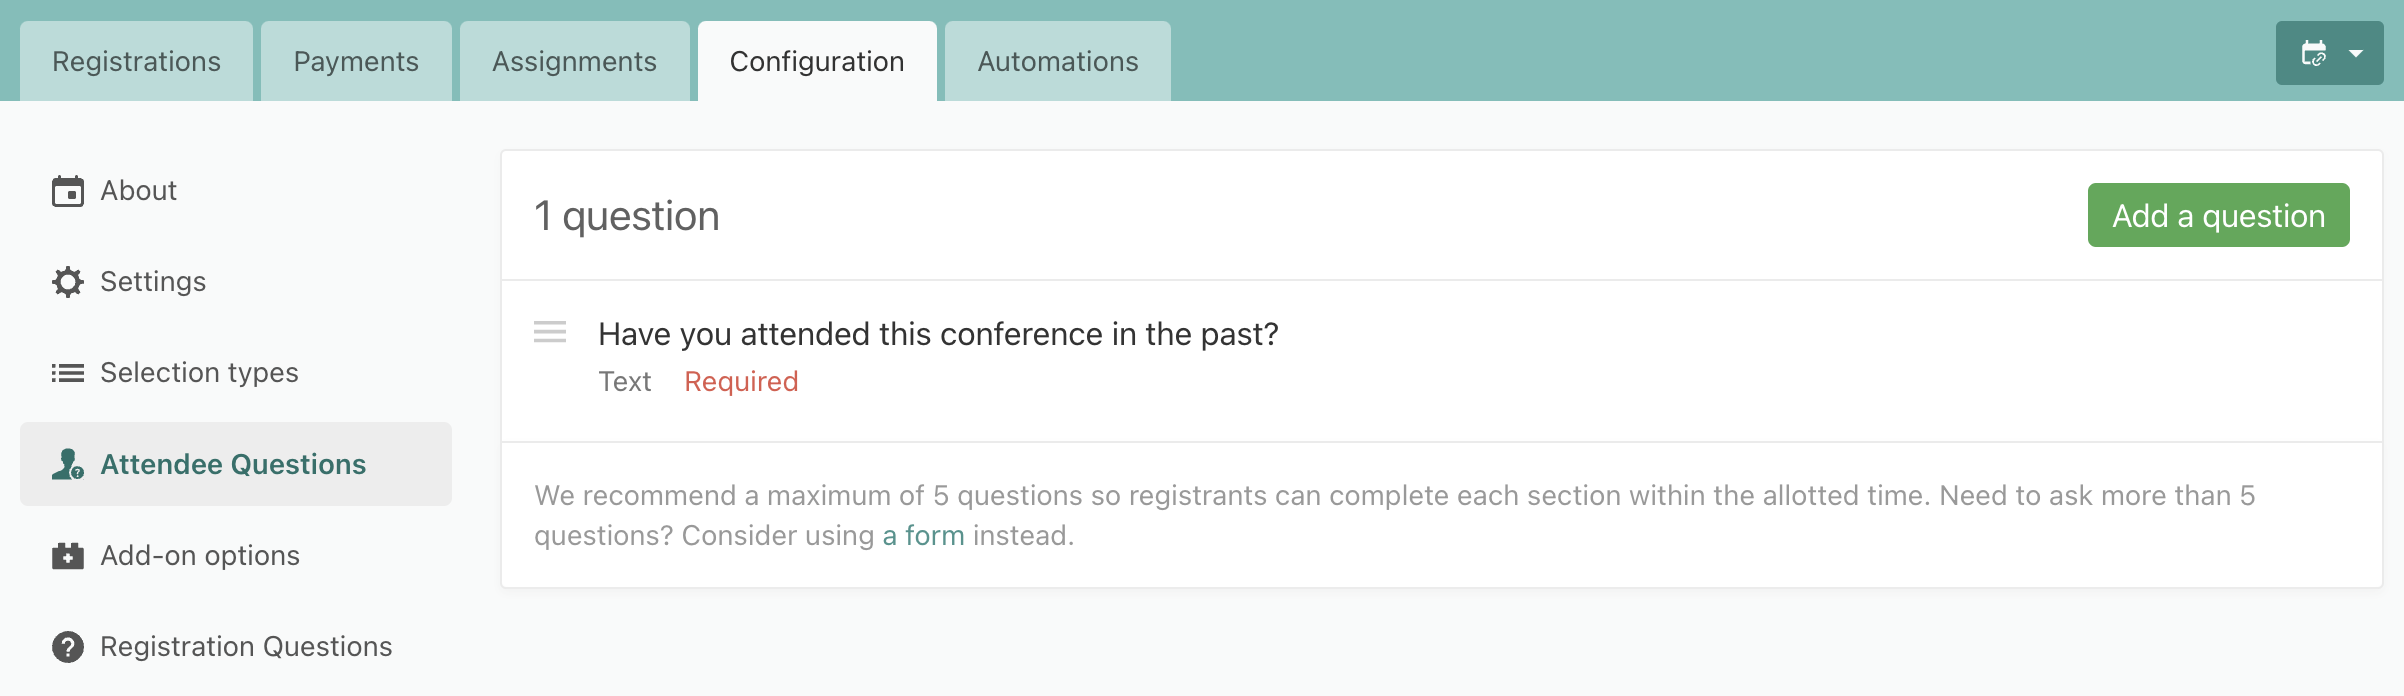 attendee_questions.png